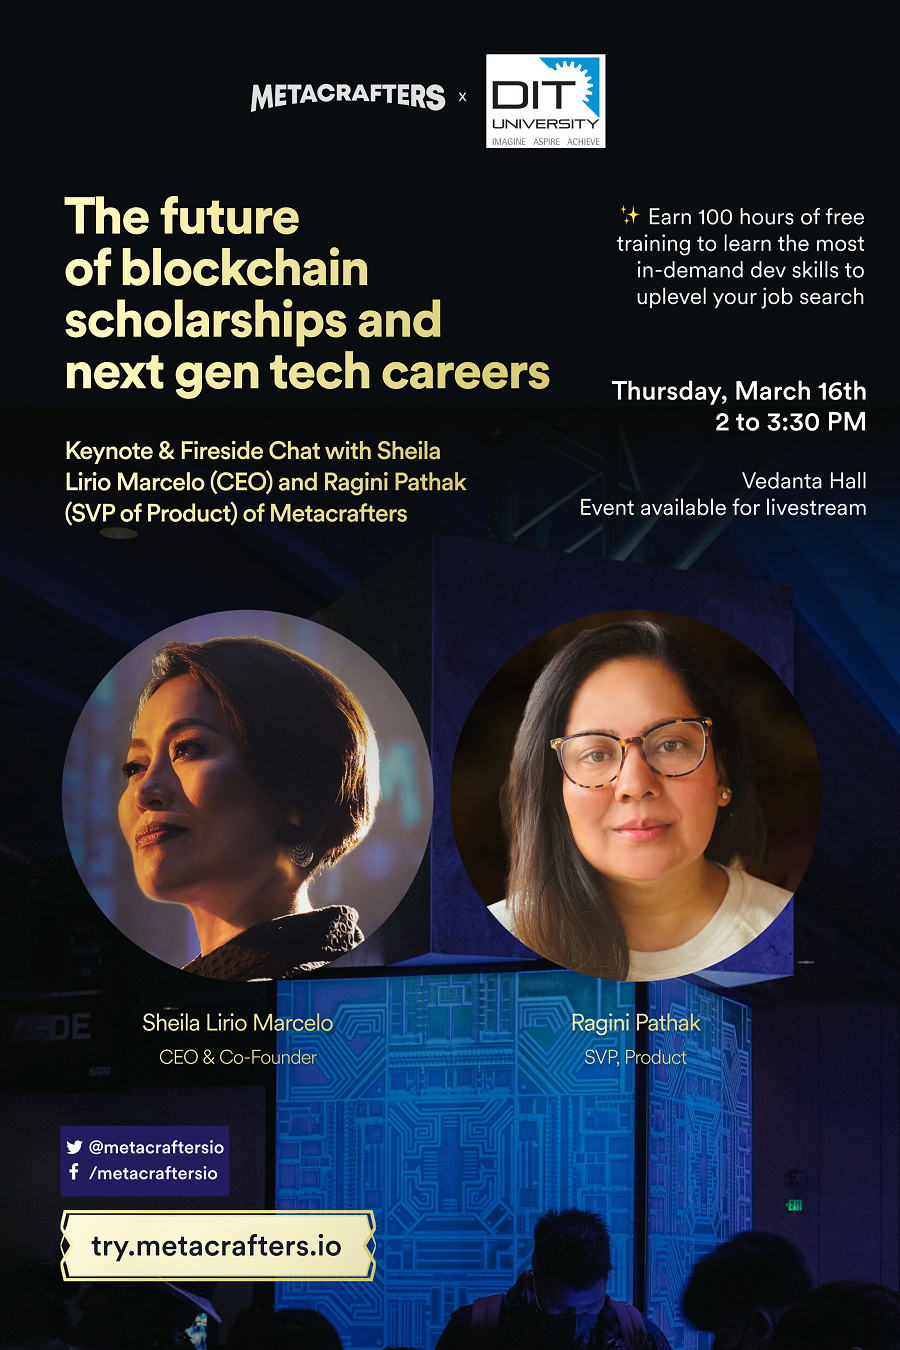 Session on Blockchain Technology and Career Prospects